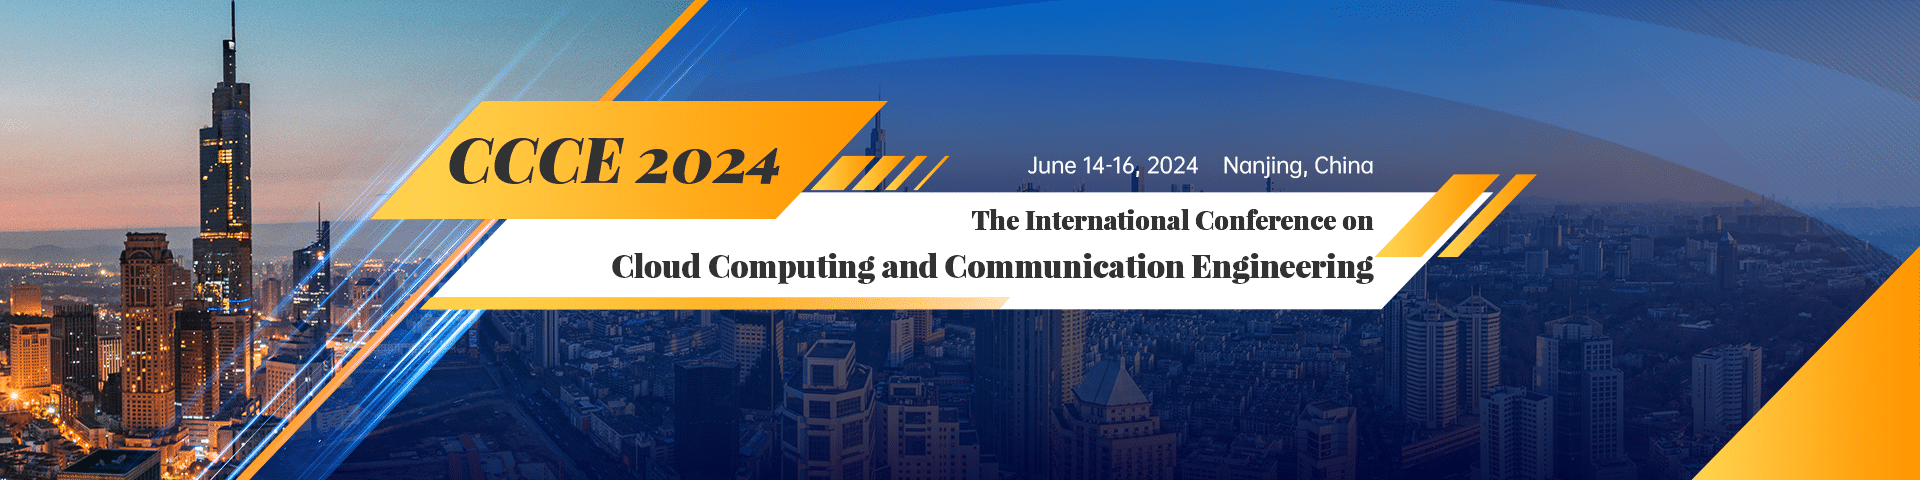 2024 International Conference on Cloud Computing and Communication Engineering(CCCE 2024)